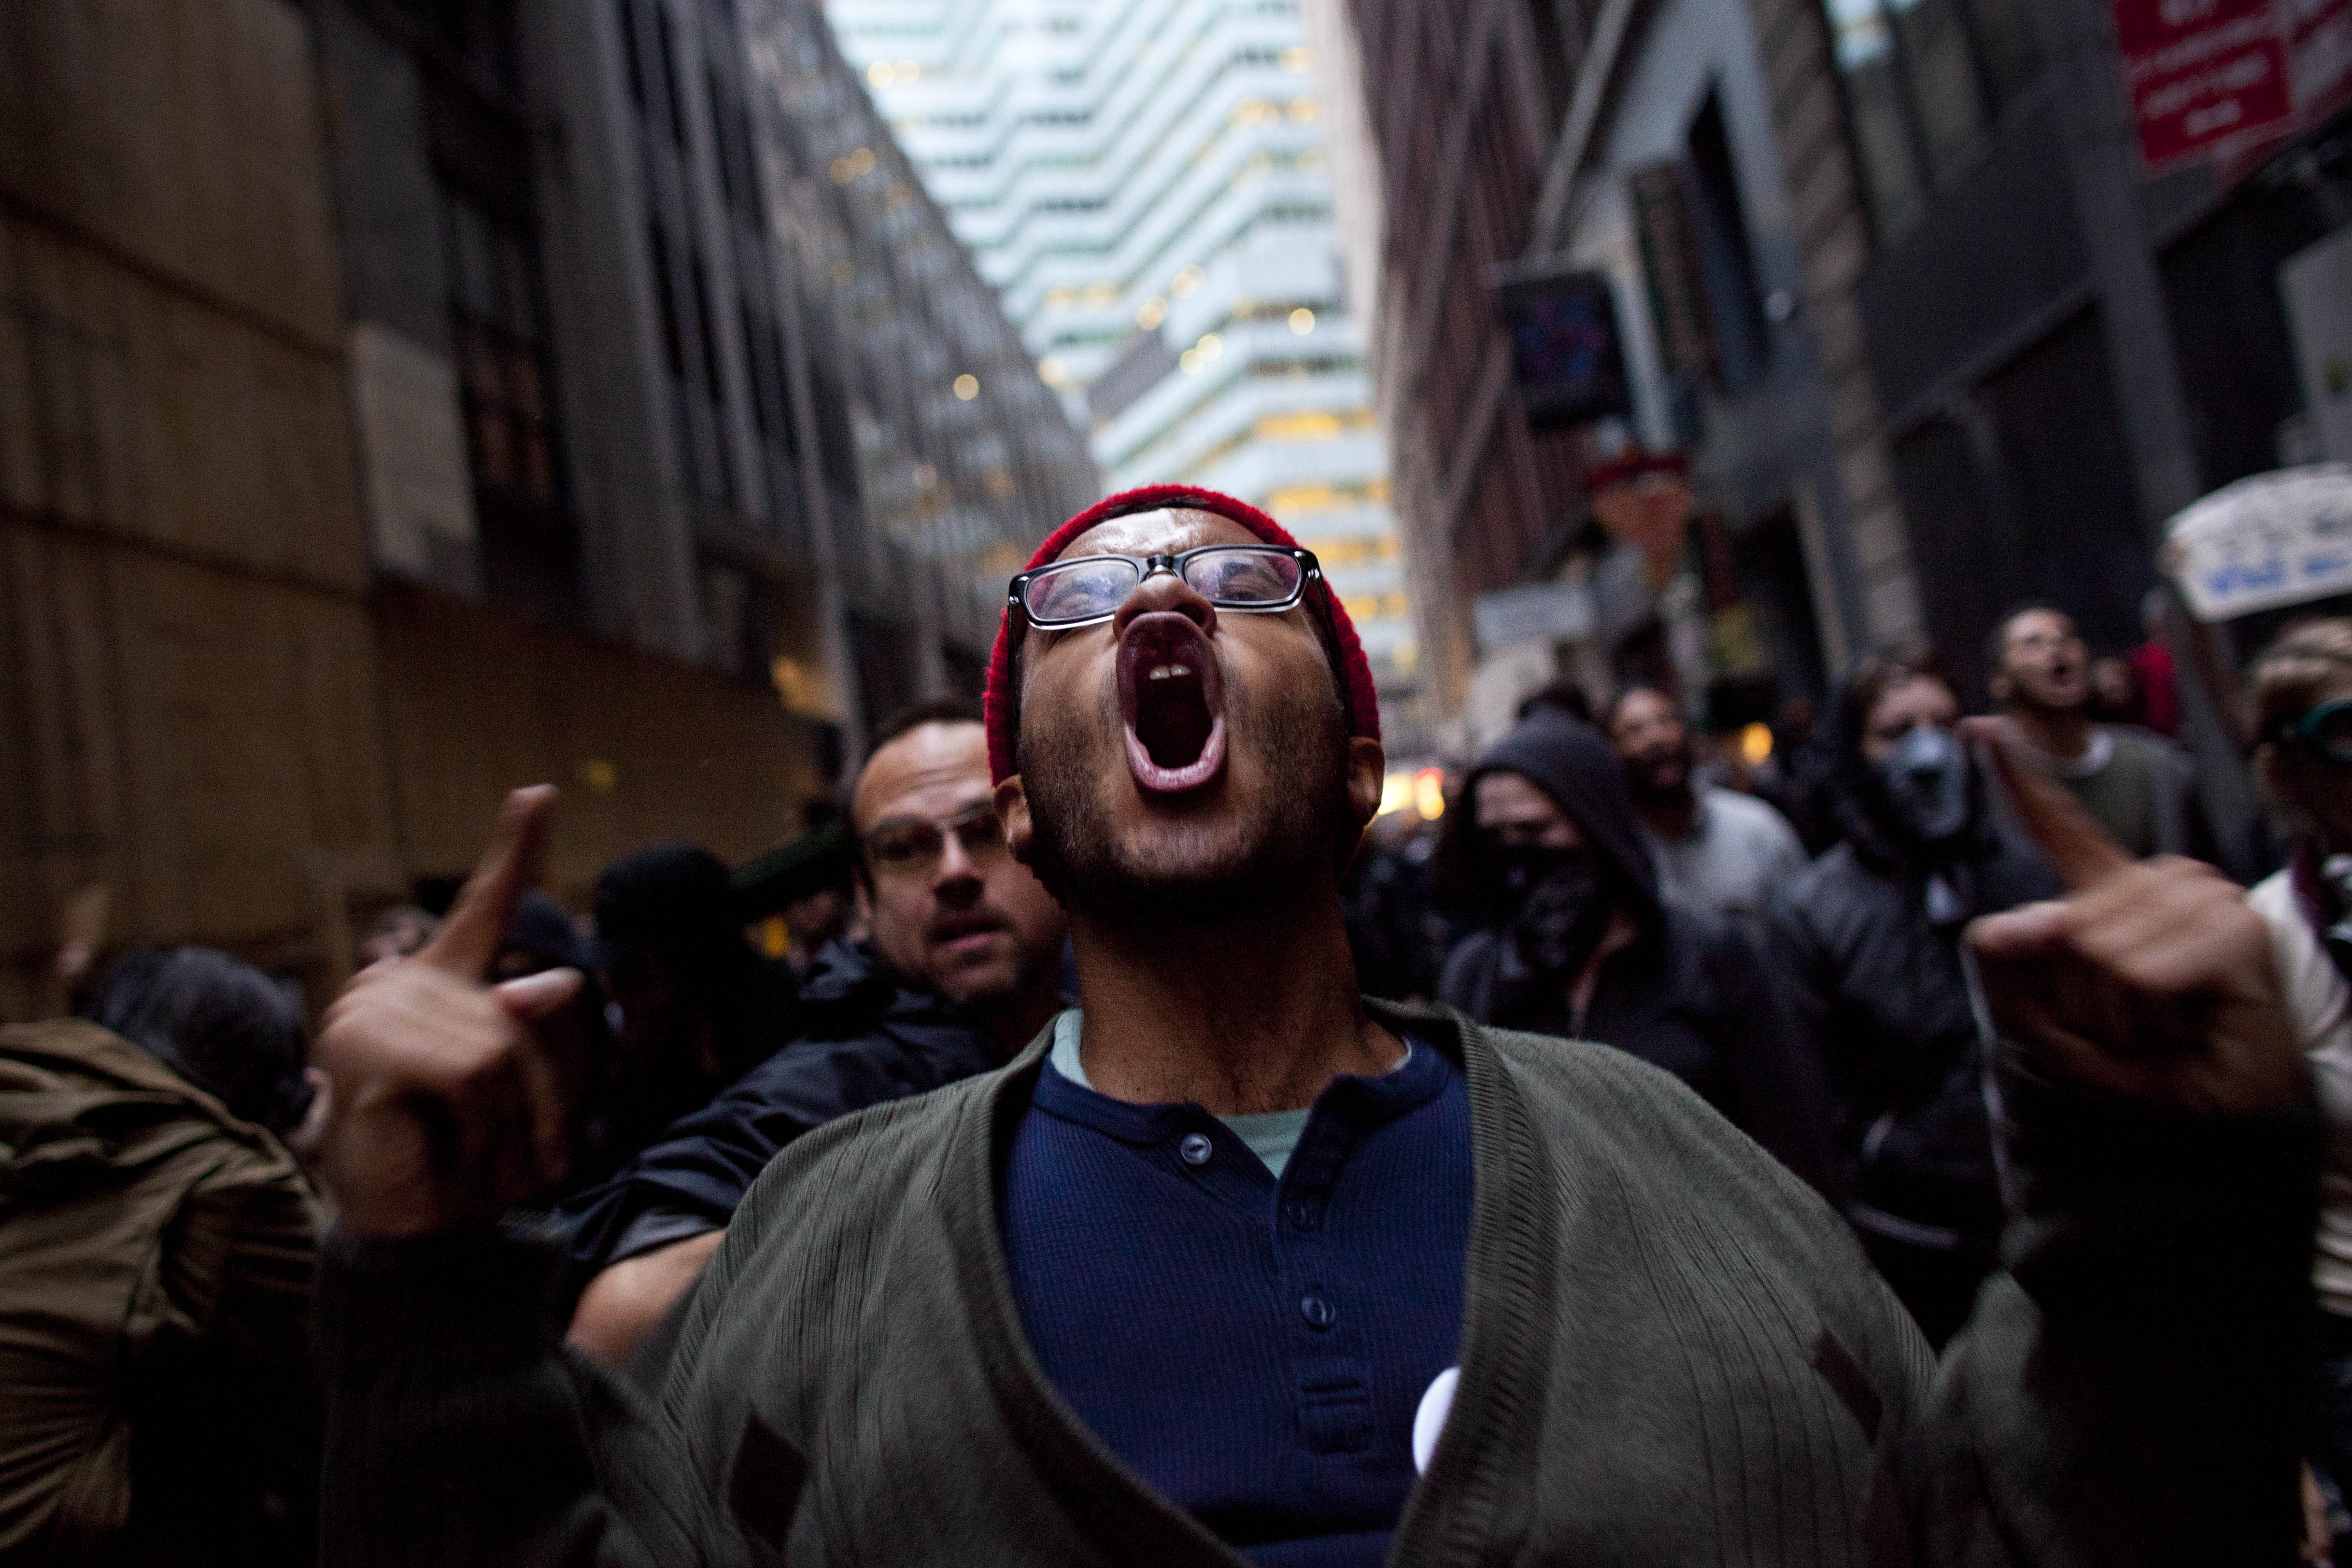 An Occupy Wall Street protester in 2011.